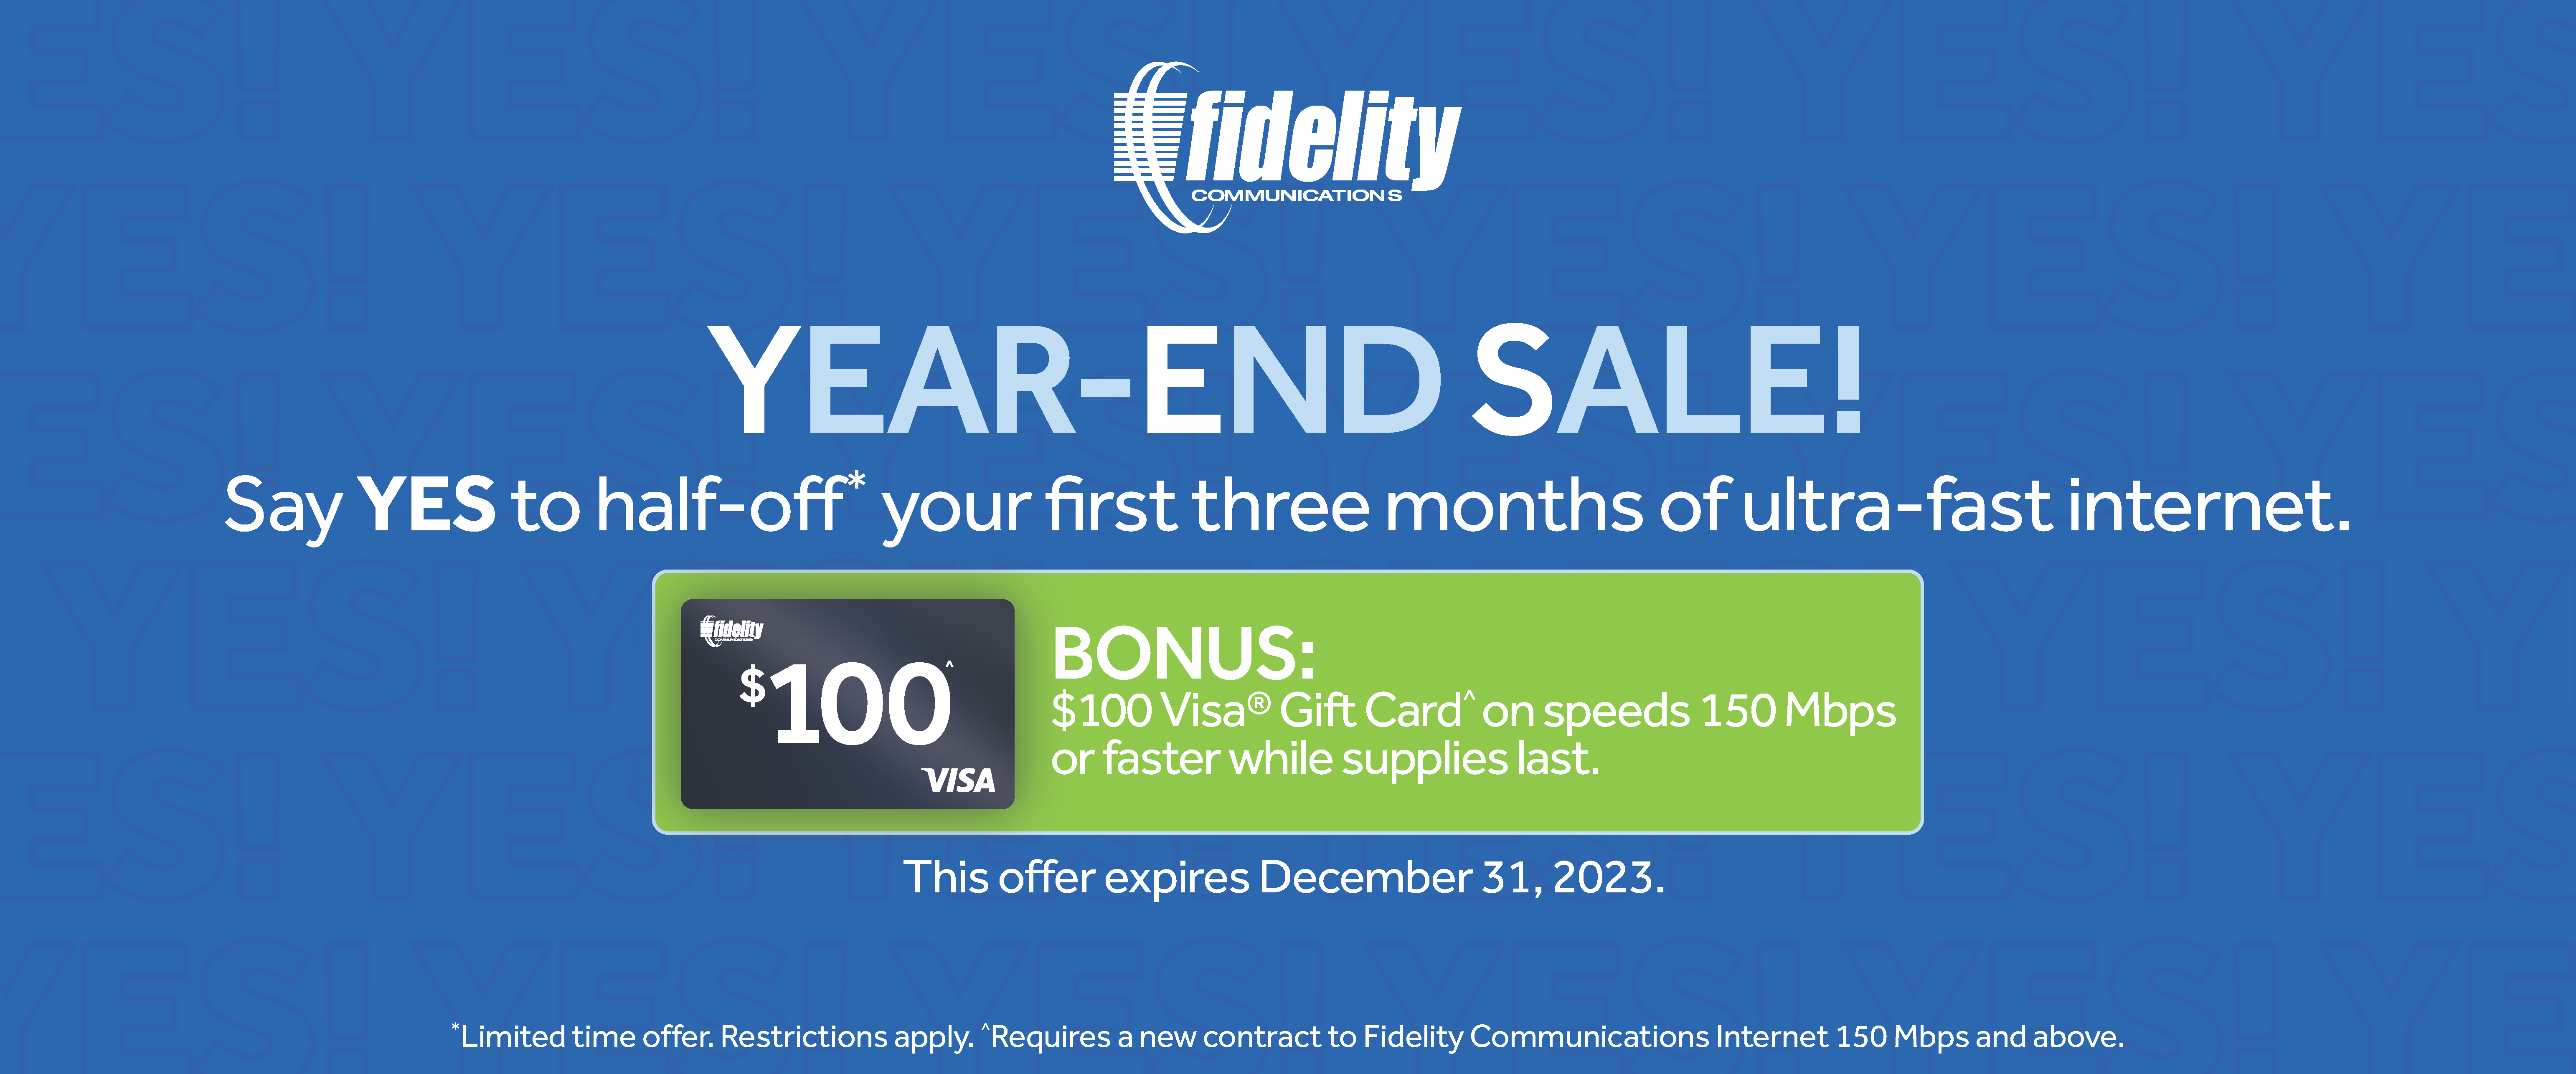 YEAR-END-SALE! say YES to half-off your first three months of ultra-fast internet. $100 BONUS: $100 Visa Gift Card on speeds 150 Mbps or faster while supplies last. This offer expires December 31, 2023. Limited time offer. Restrictions apply. Requires a new contract to Fidelity Communications Internet 150 Mbps and above.